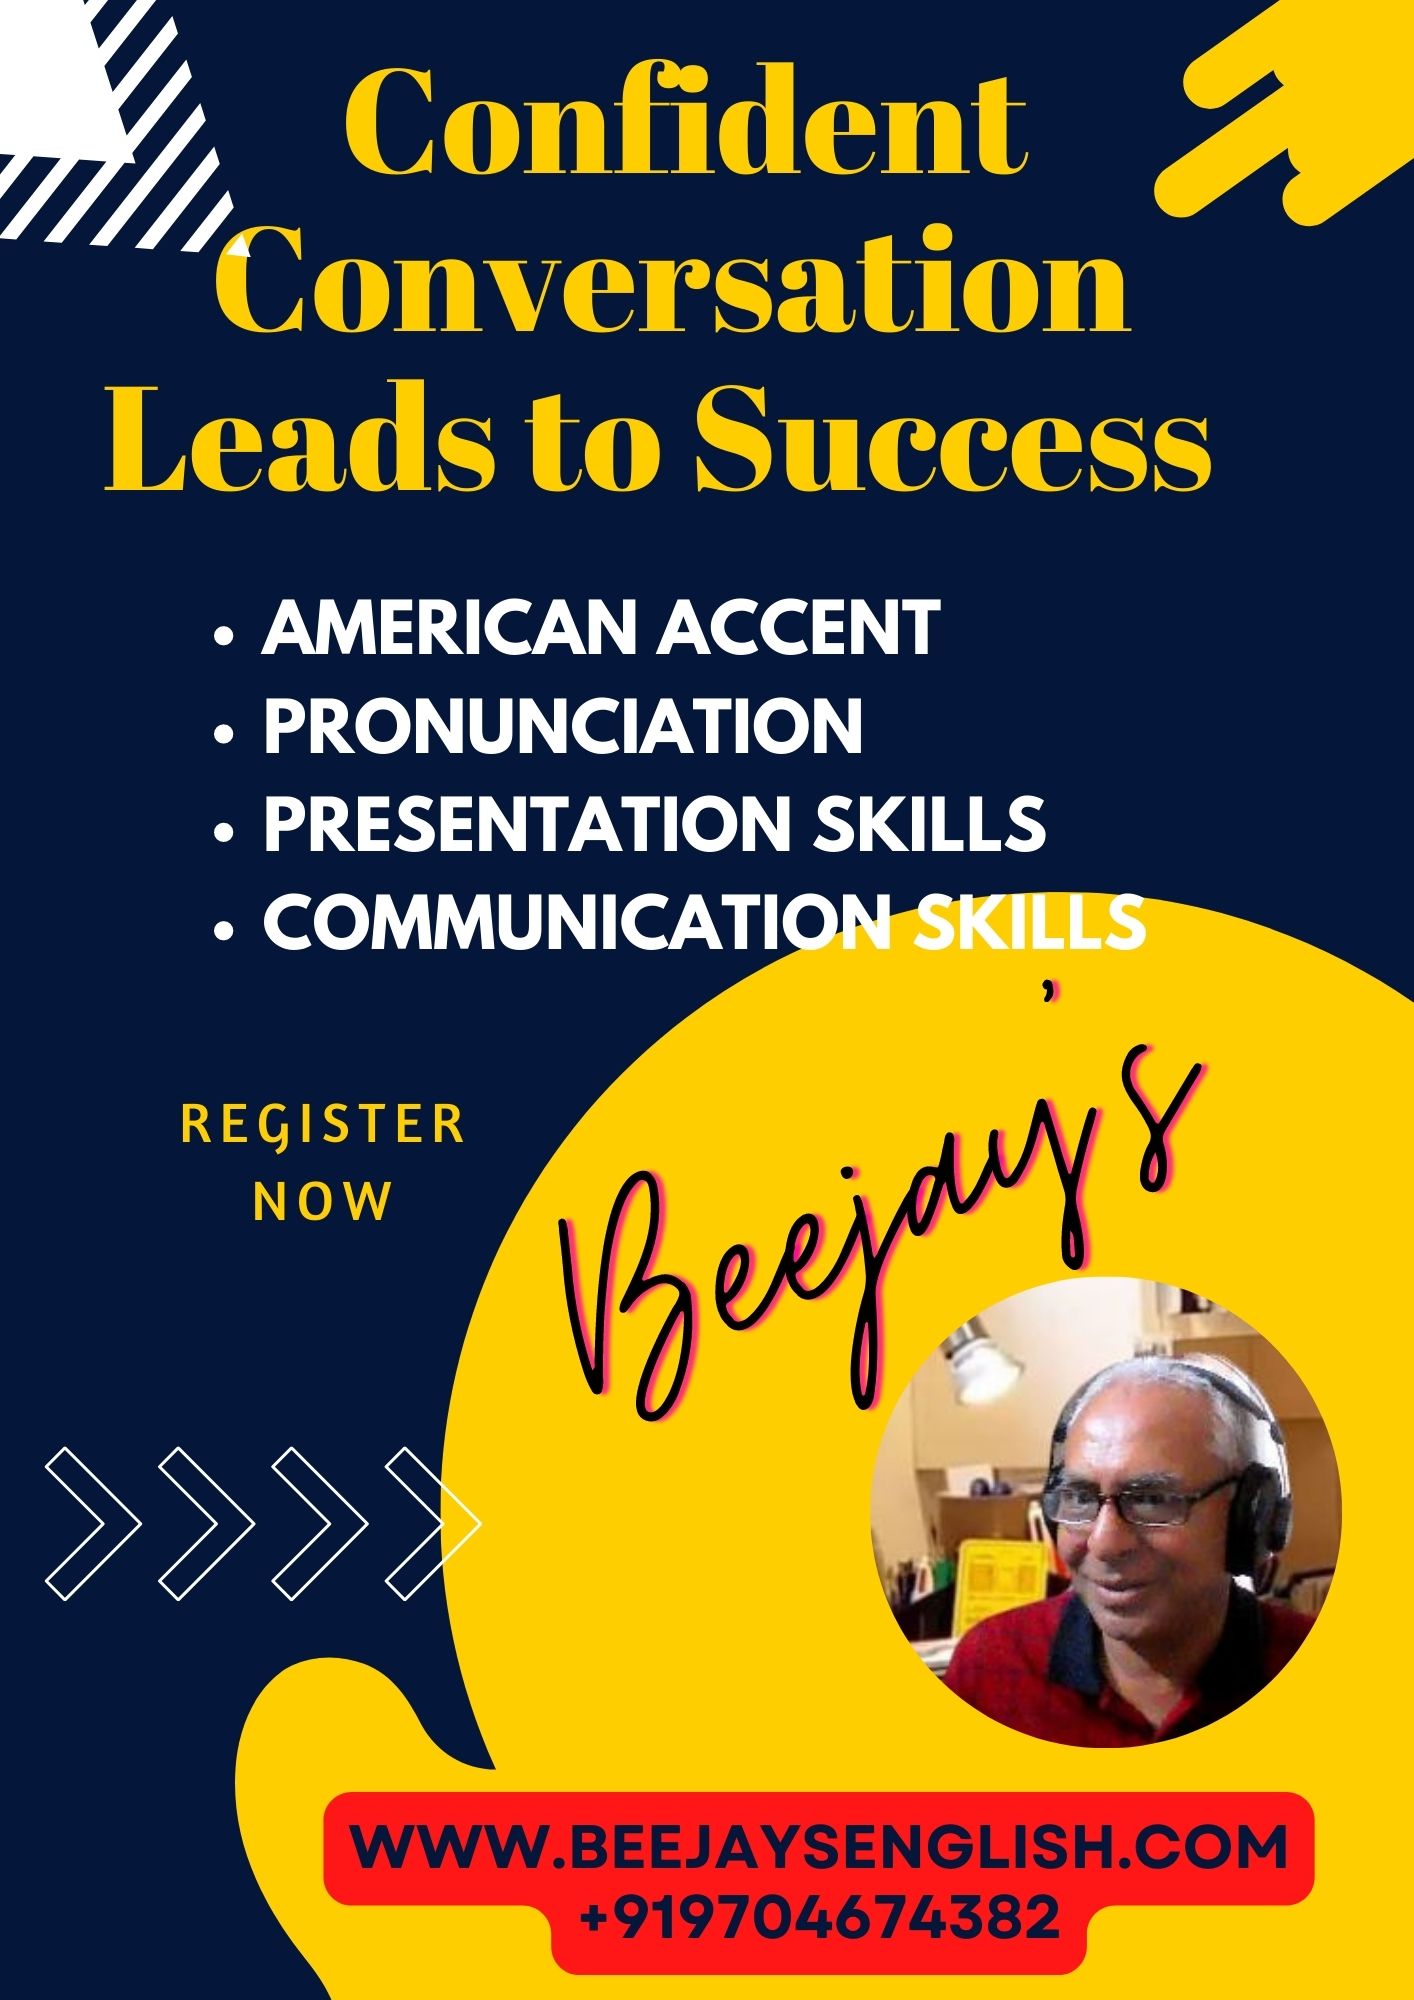 Beejays American Accent Online MasterClass for Indian ManagersEducation and LearningCoaching ClassesAll Indiaother